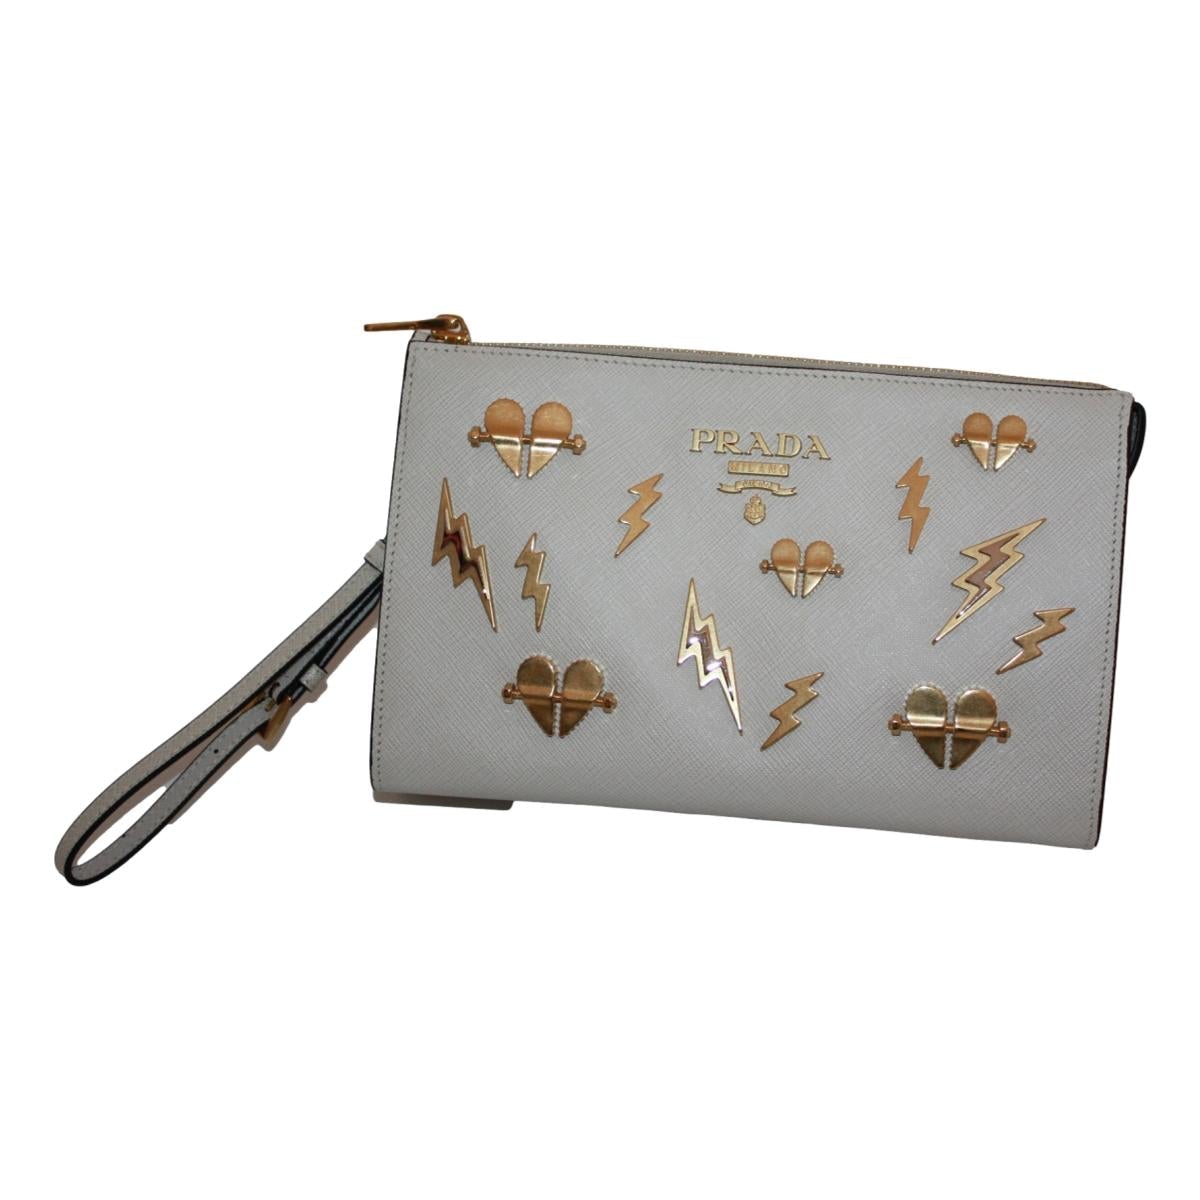 Prada White Saffiano Leather Gold Hearts Pouch Wristlet Bag 1NE007 at_Queen_Bee_of_Beverly_Hills